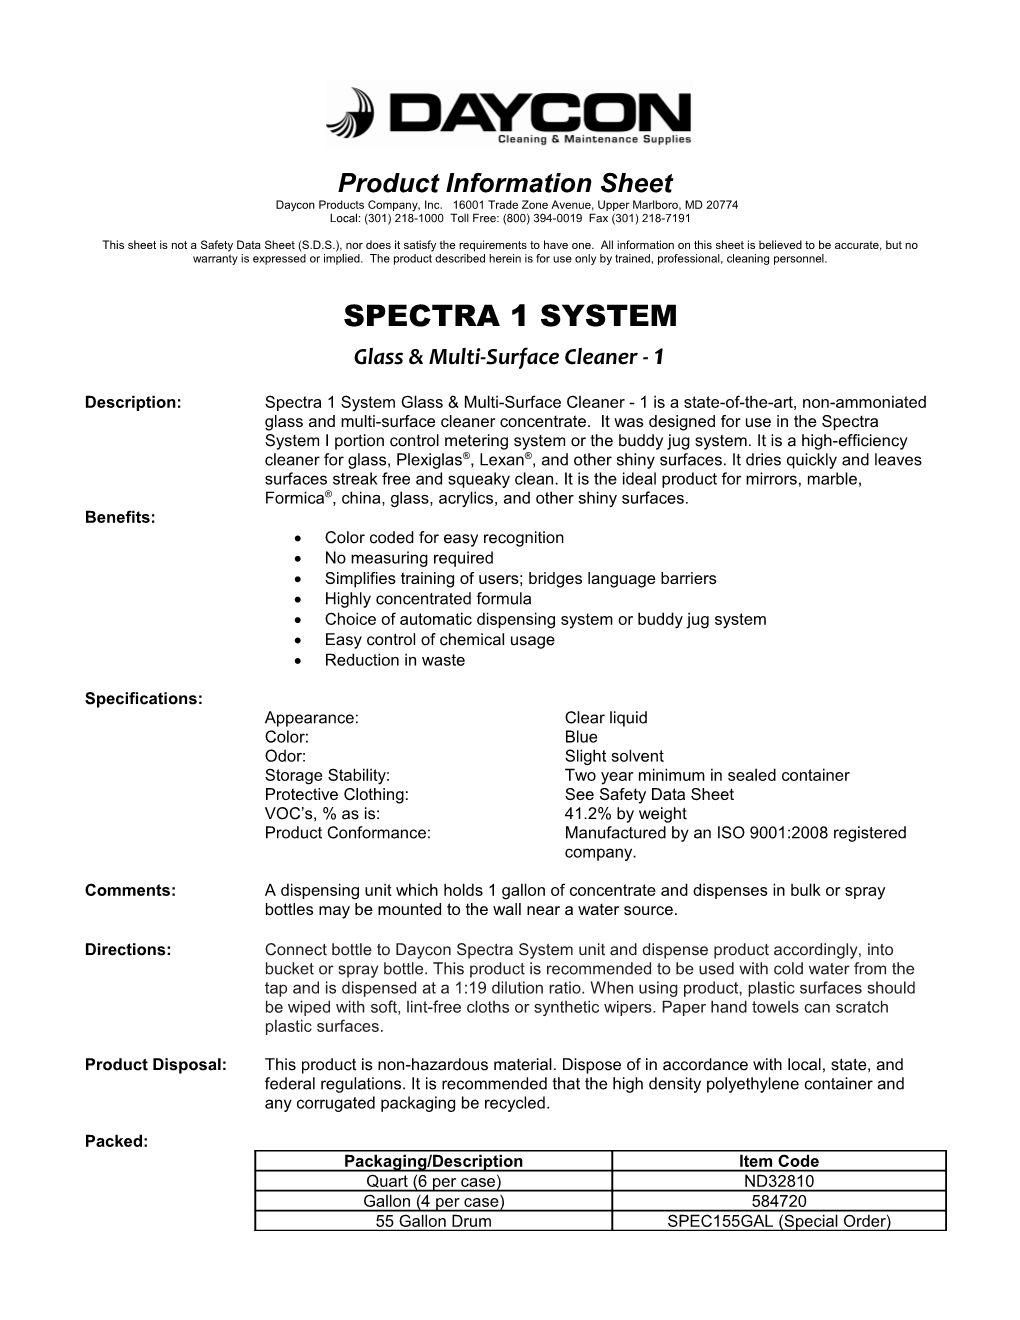 Product Information Sheet: Spectra 1